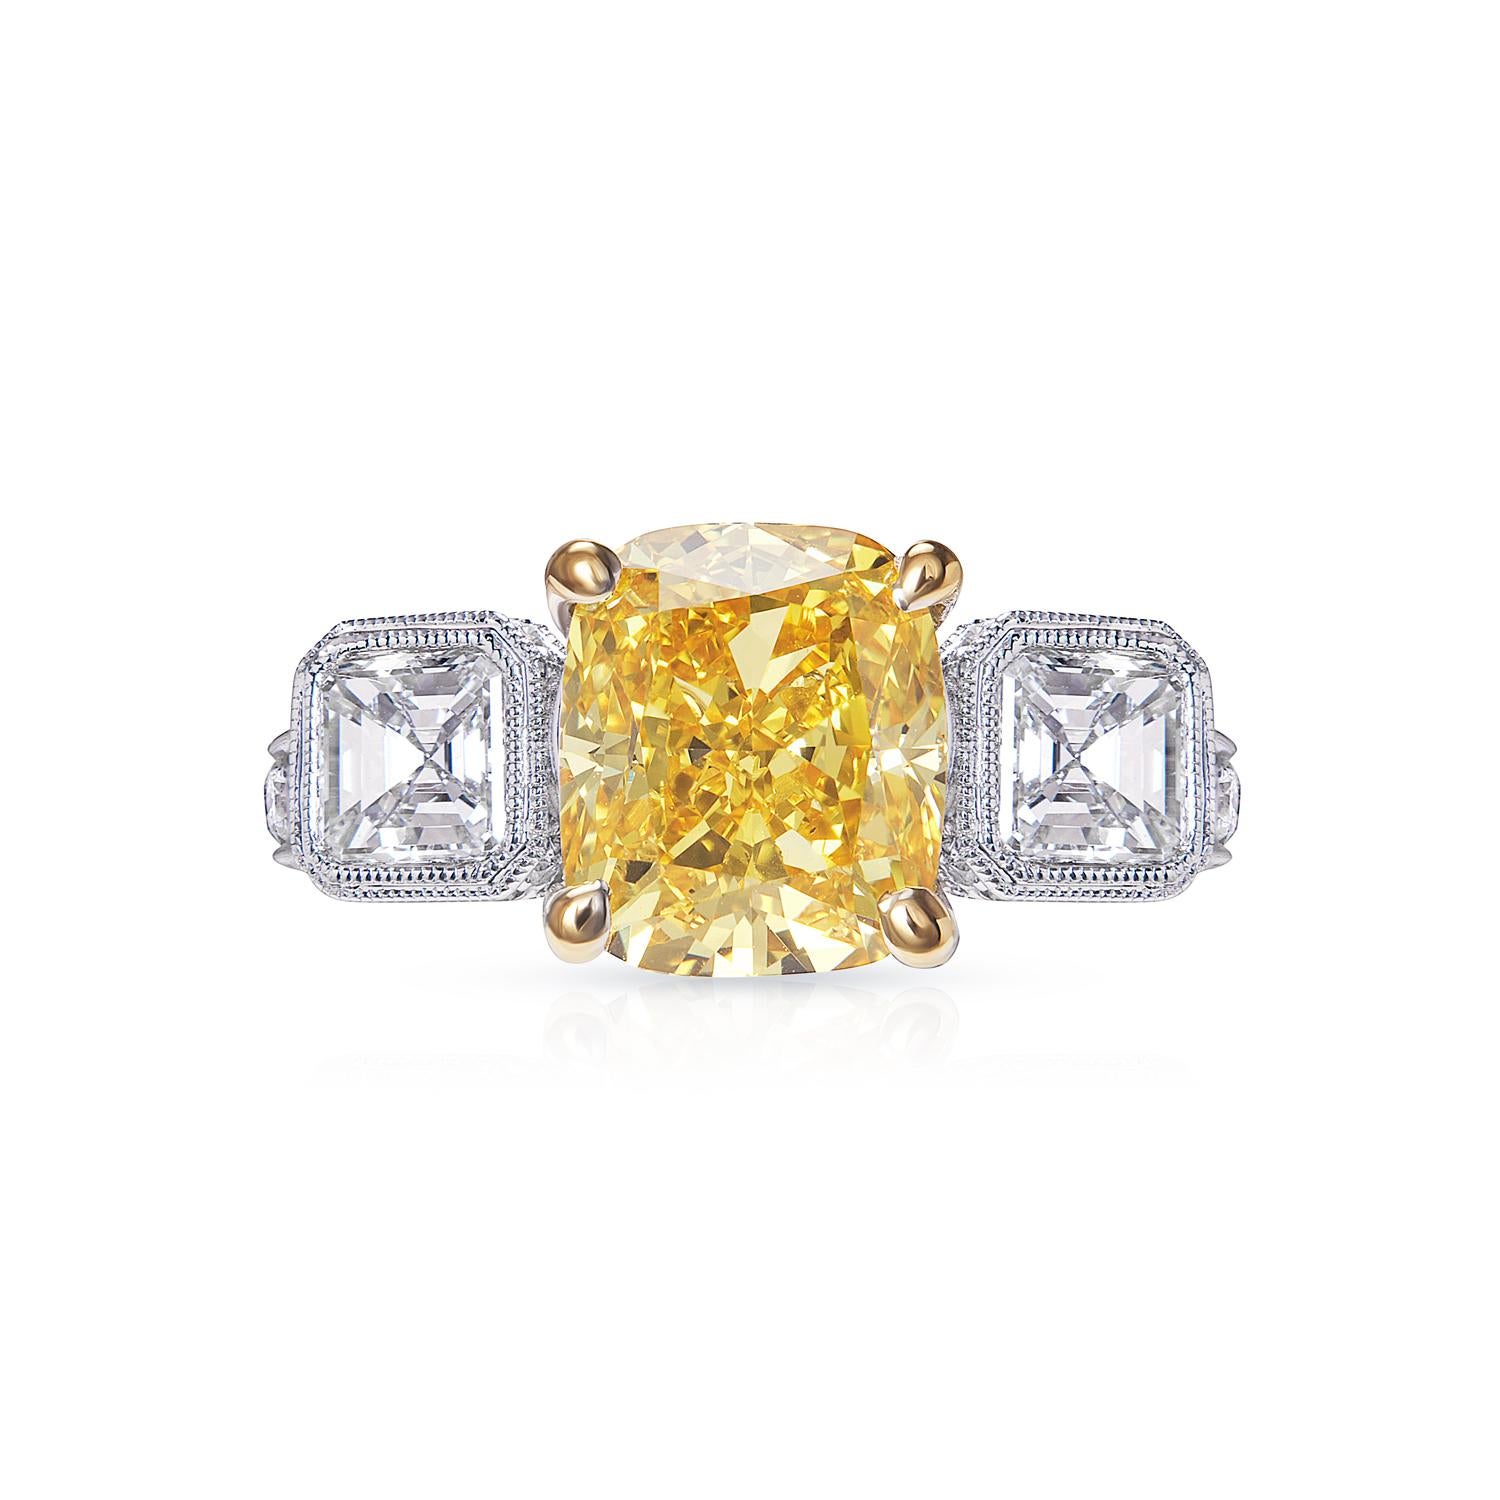 This exquisite Cushion-Cut Diamond Ring is the perfect way to add a touch of luxury to your look. The beautiful cushion-cut diamond is the centerpiece of this stunning ring, flanked by two smaller diamonds on either side. This ring's simple, elegant